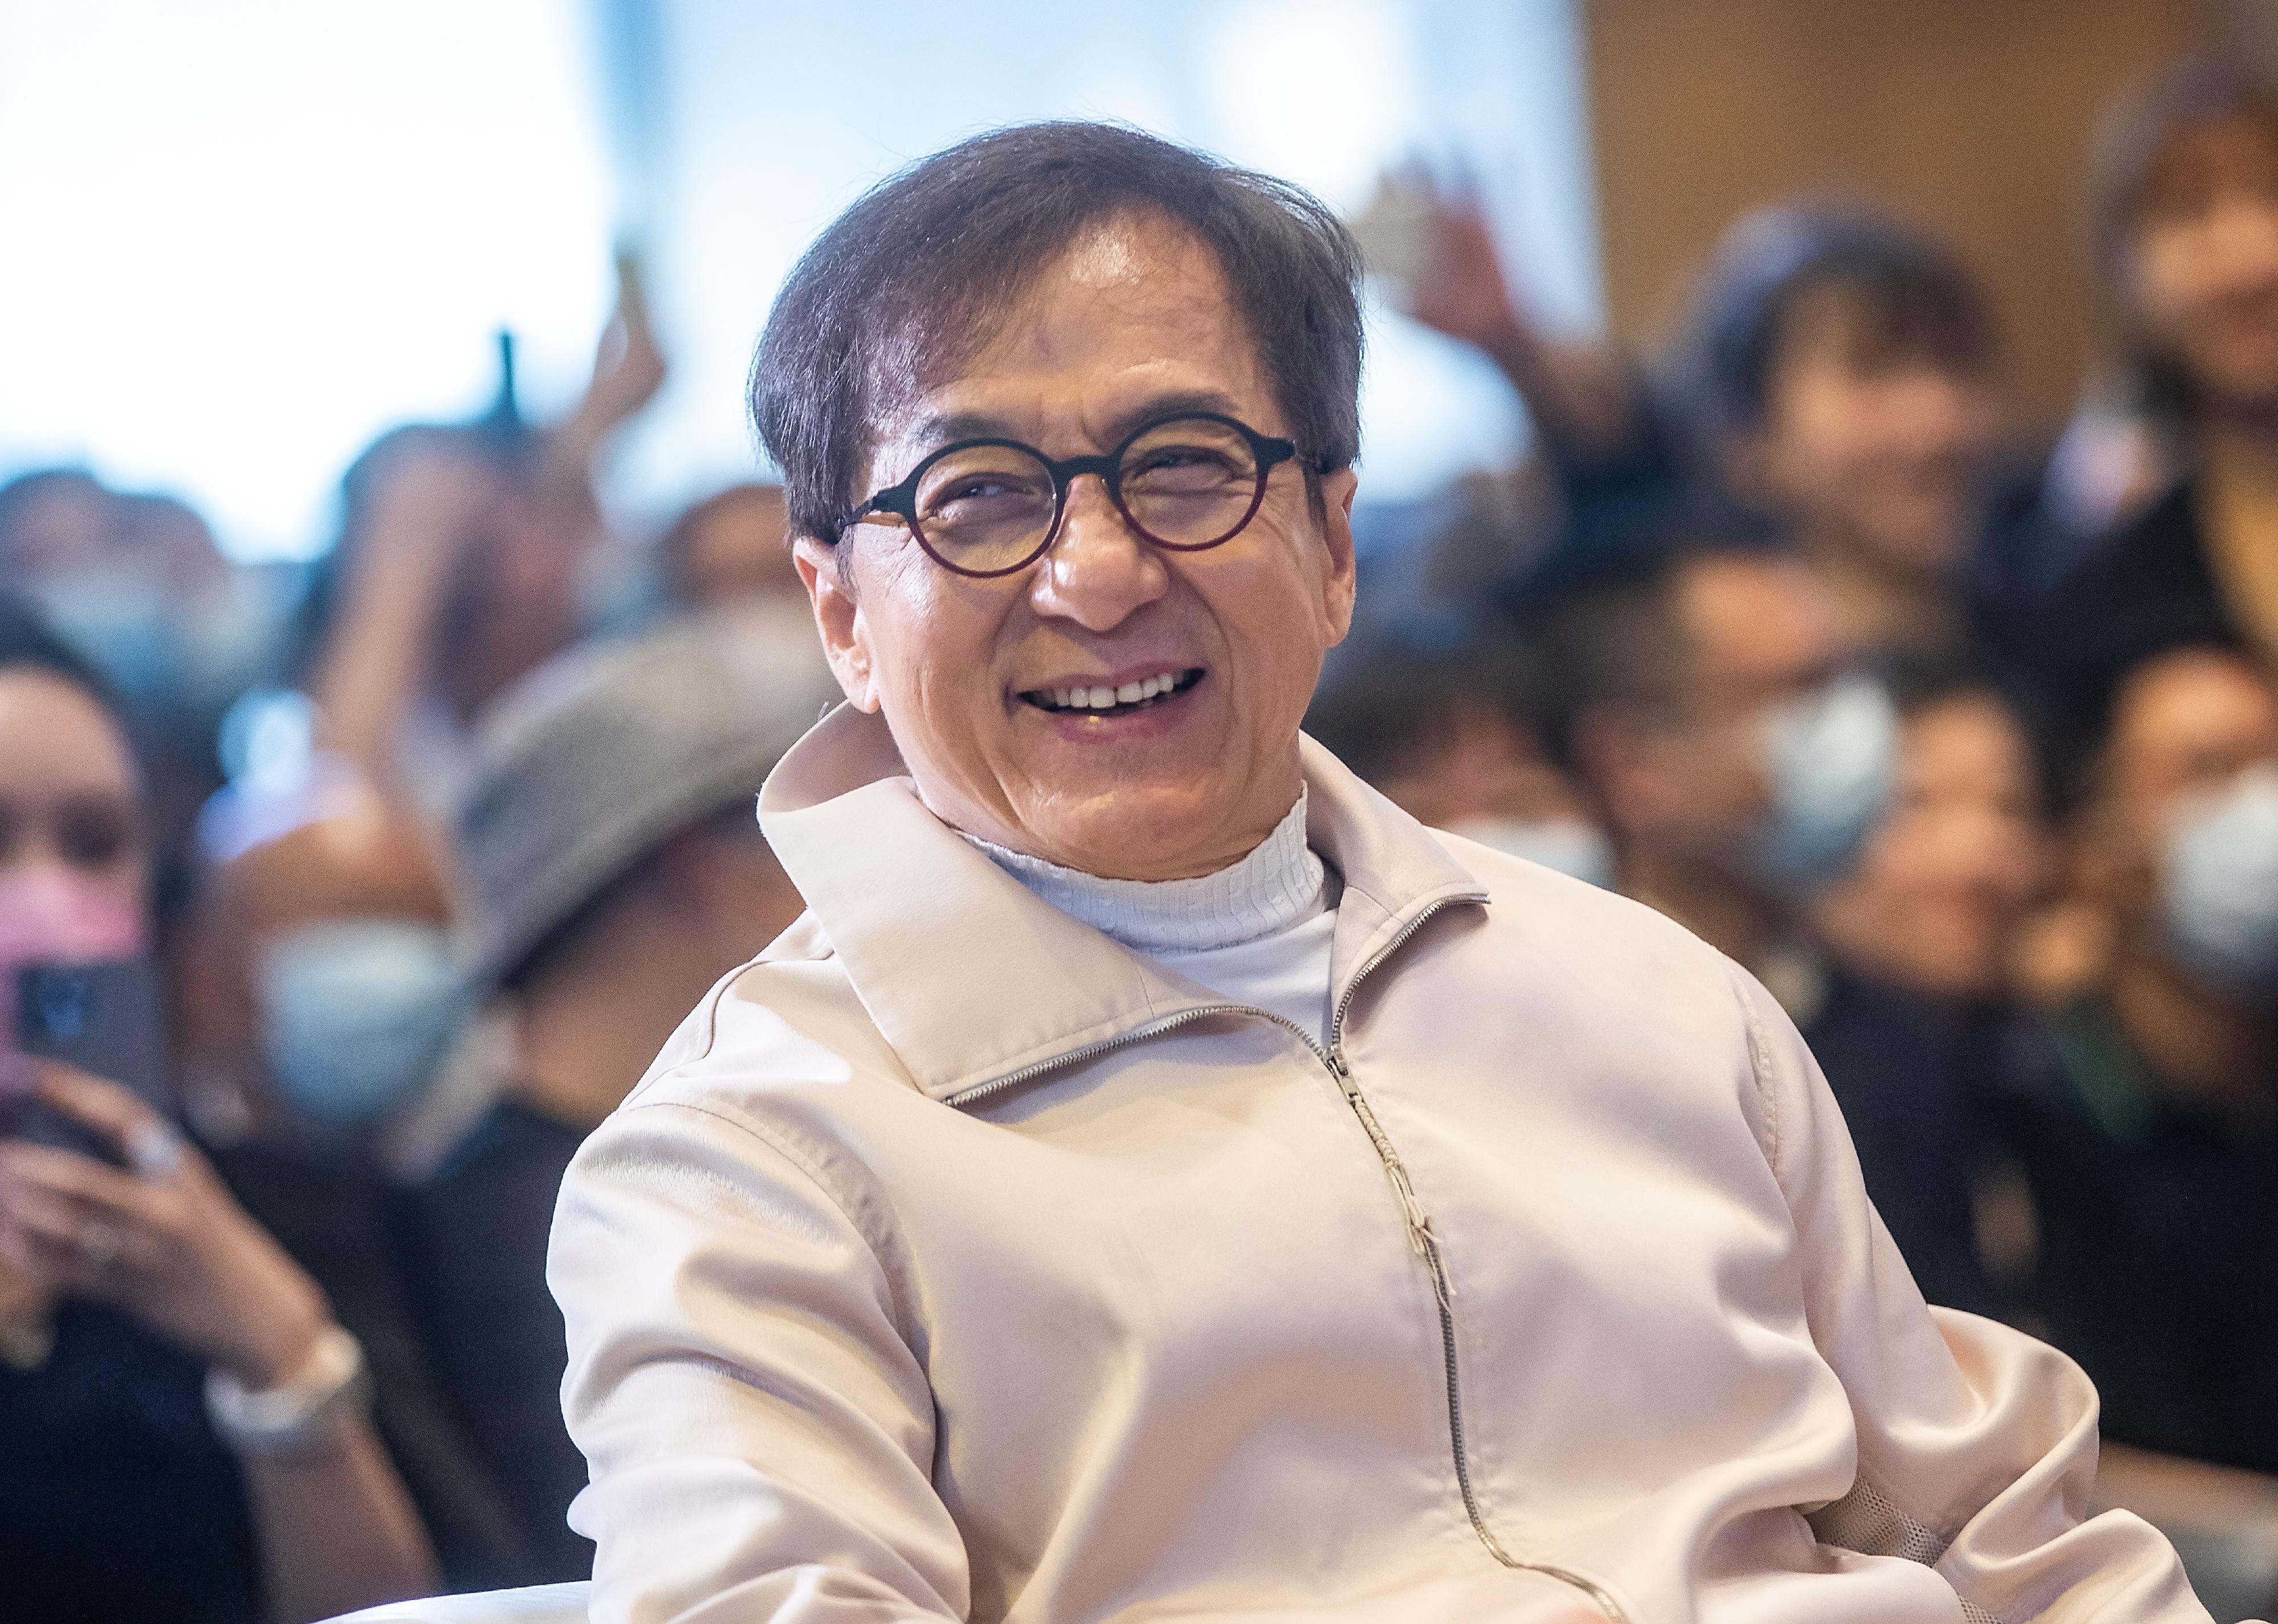 Jackie Chan visits a real estate named 'ONE53' as a spokesperson.